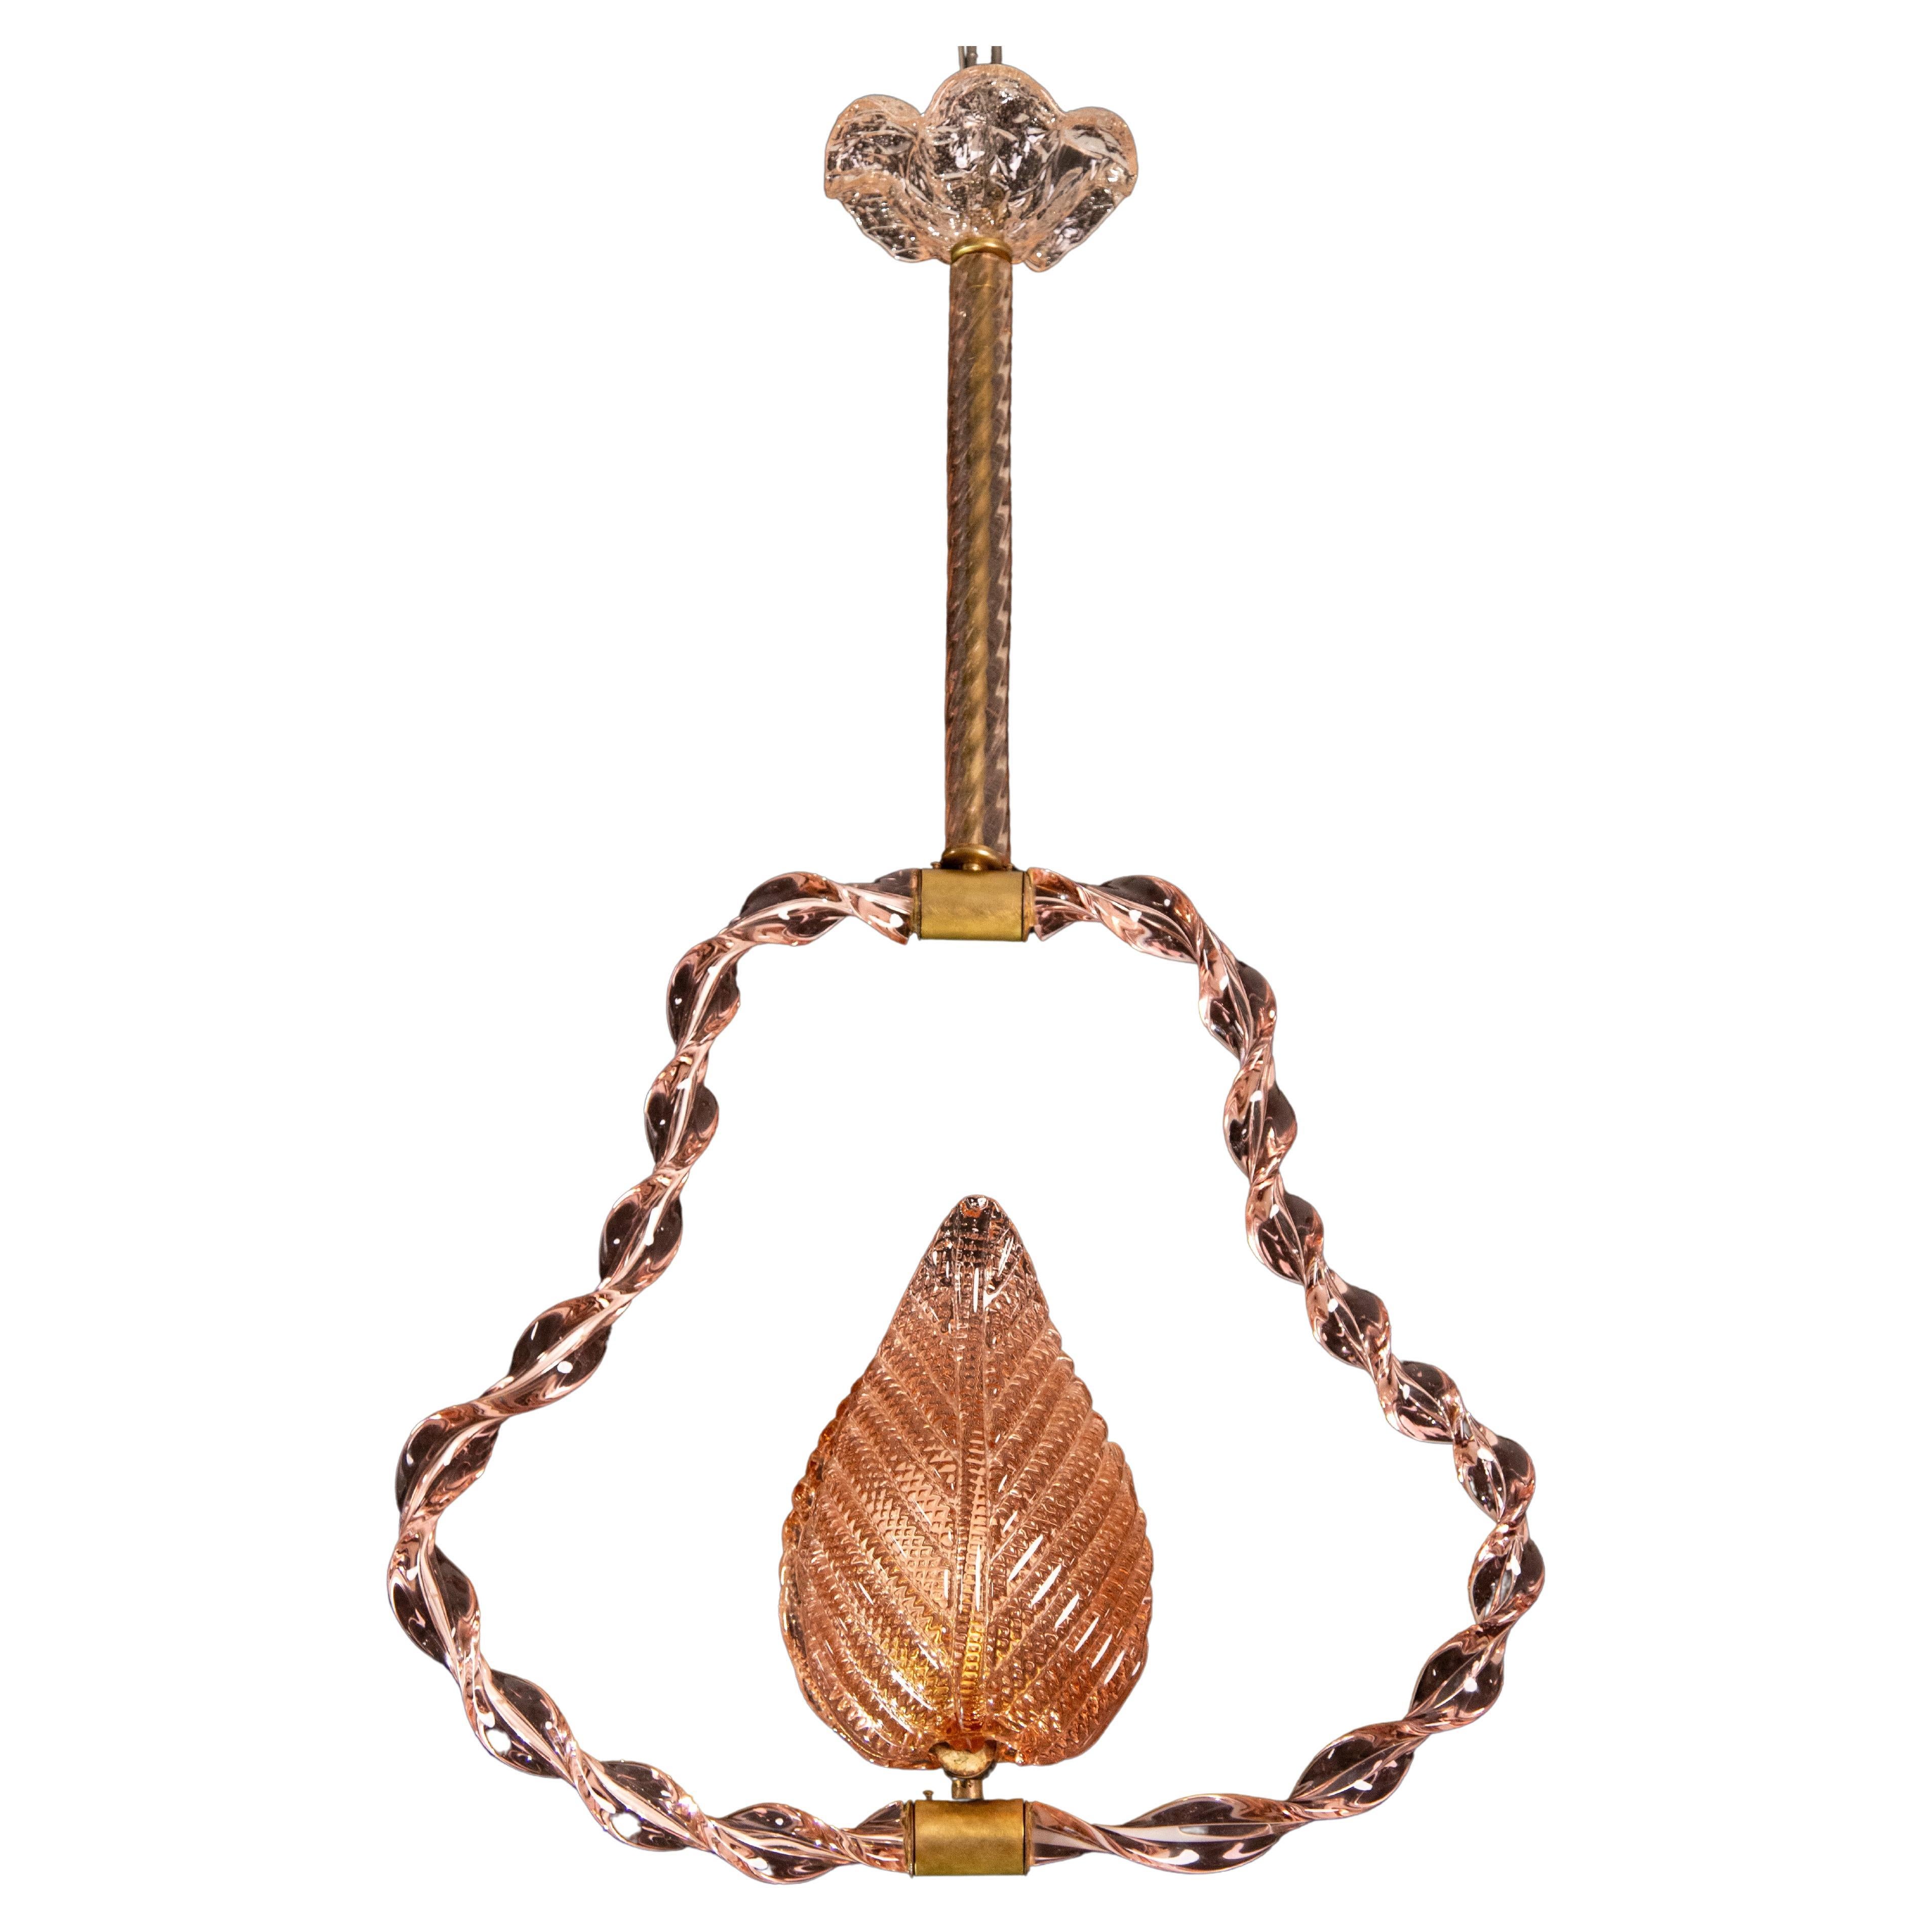 Stunning Murano chandelier by artist Ercole Barovier with rare Twisted pink glass.
The pendant consists of 6 glass elements and a brass structure.
It mounts a European standard e27 lamp.
It measures 80 centimetres in height and 50 centimetres in